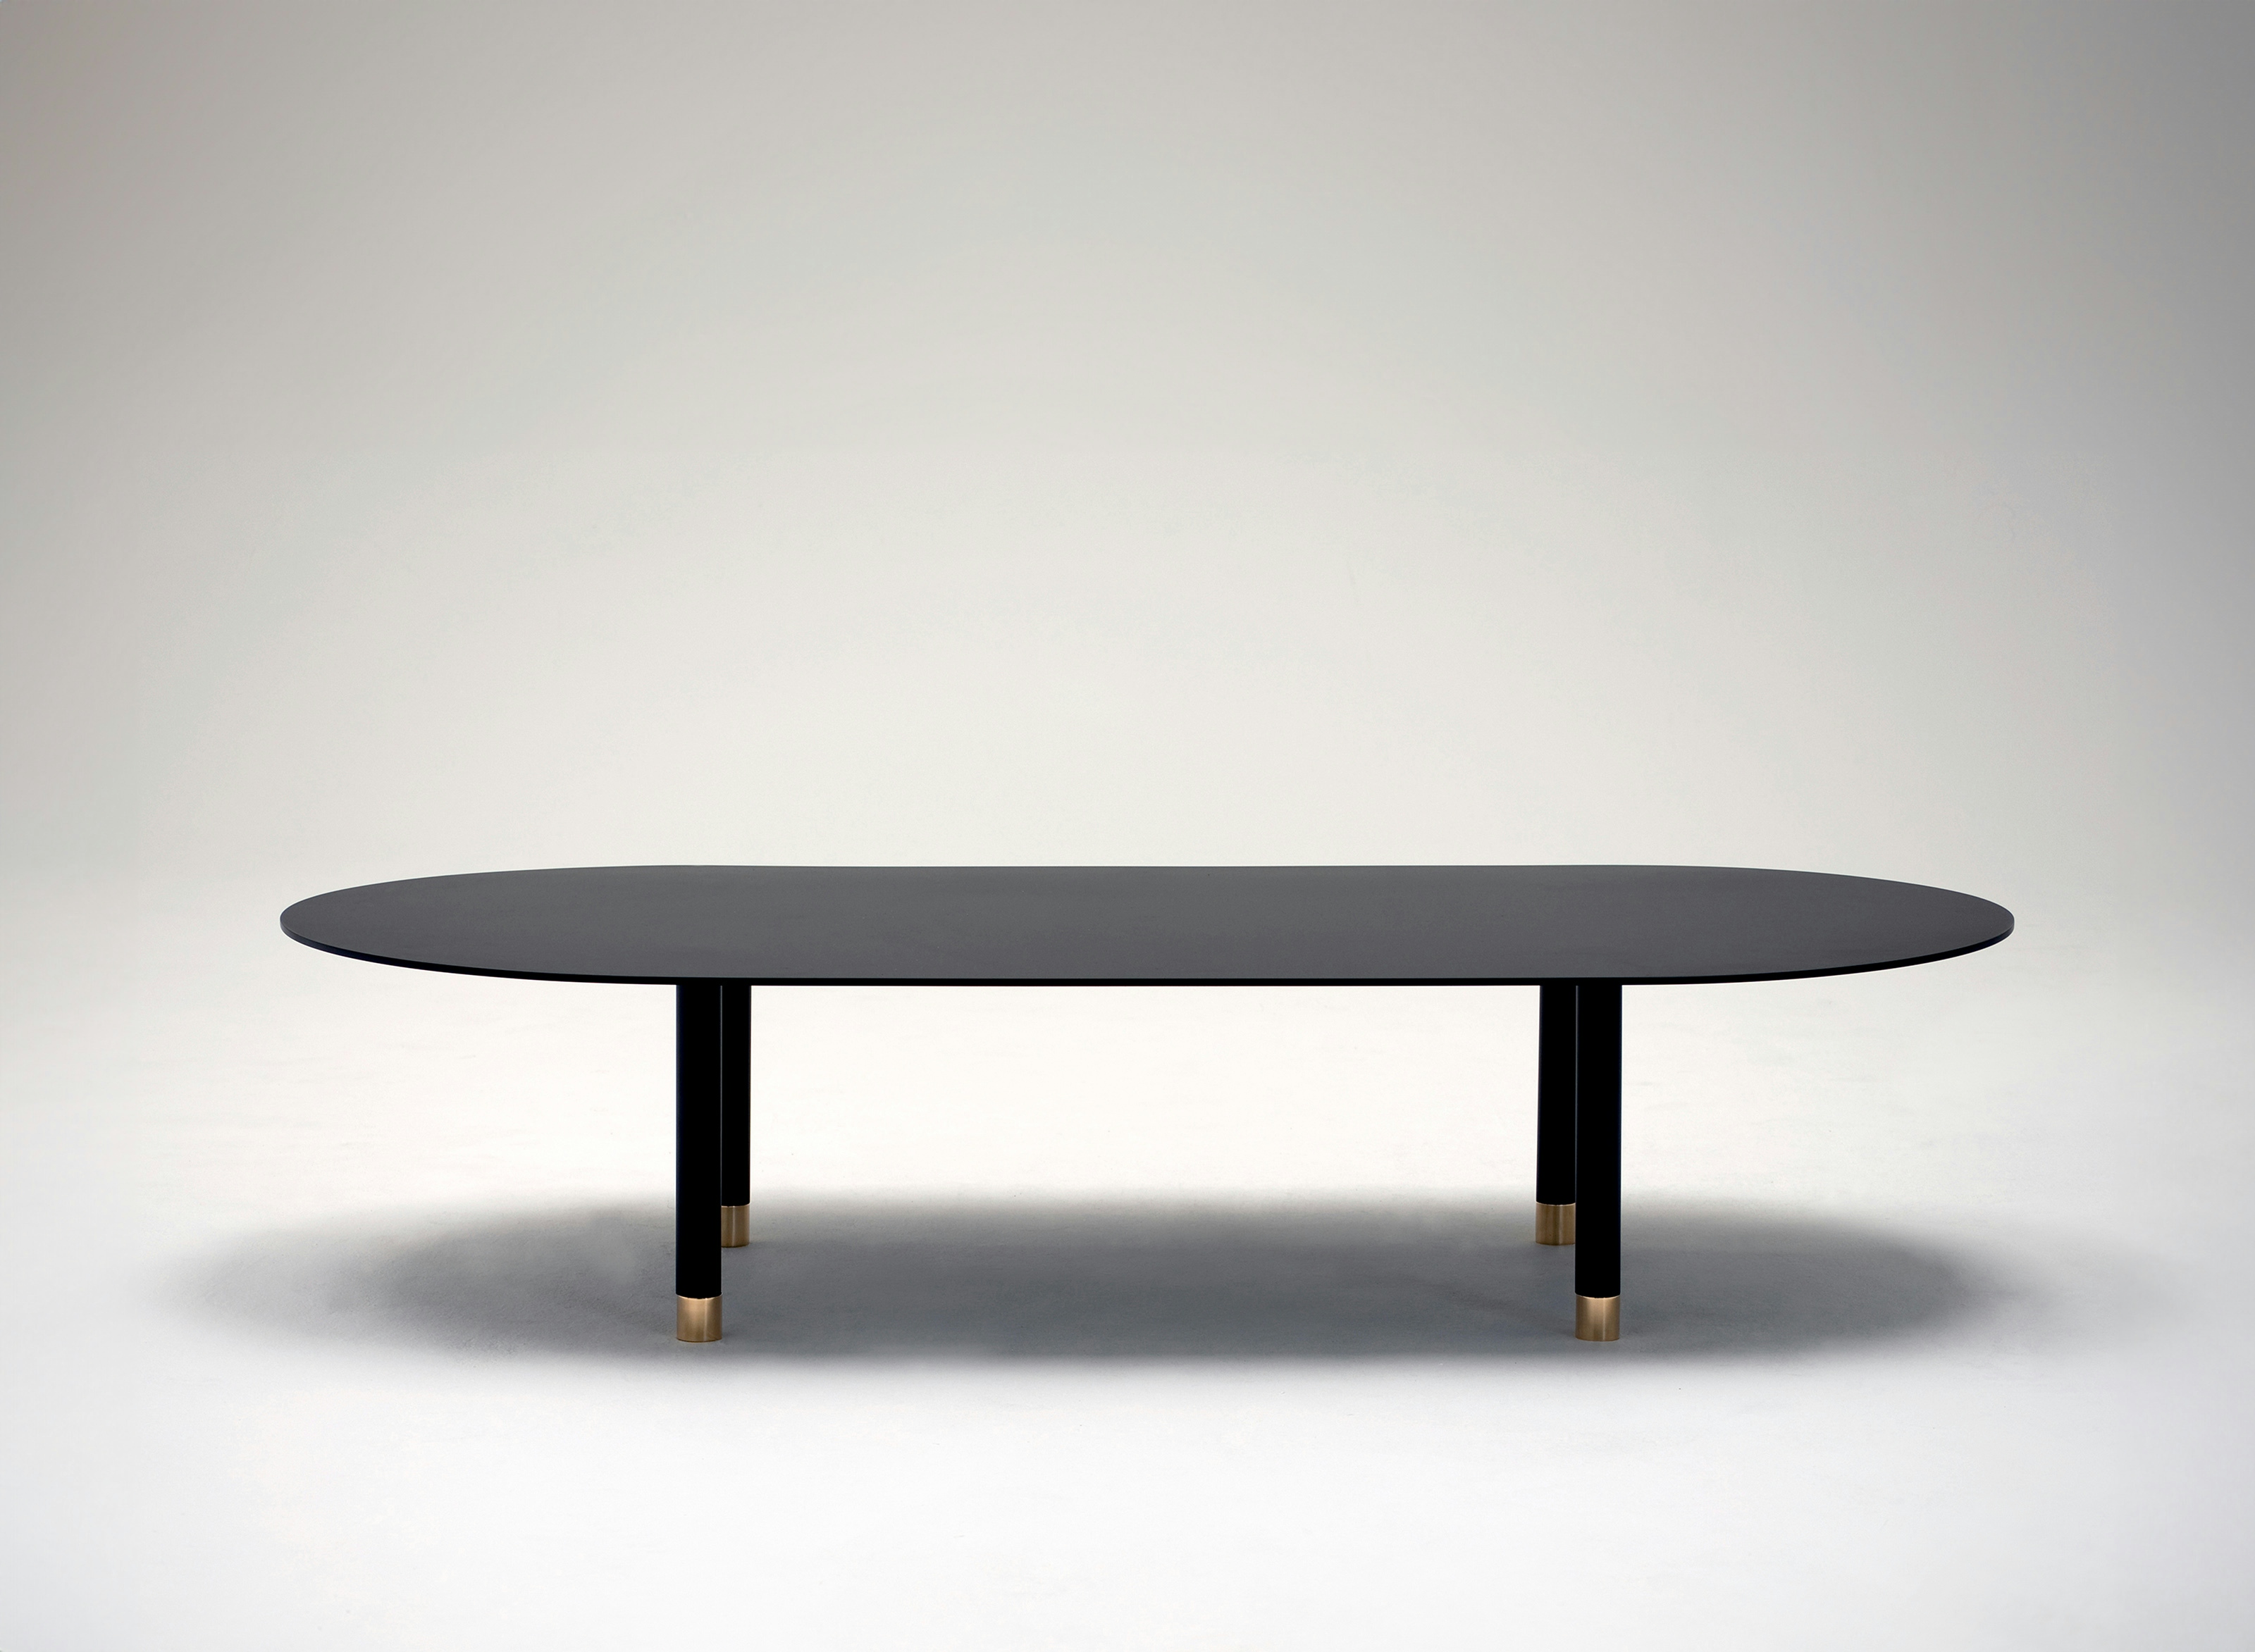 Phase Design Pill Coffee Table 1 Product Page